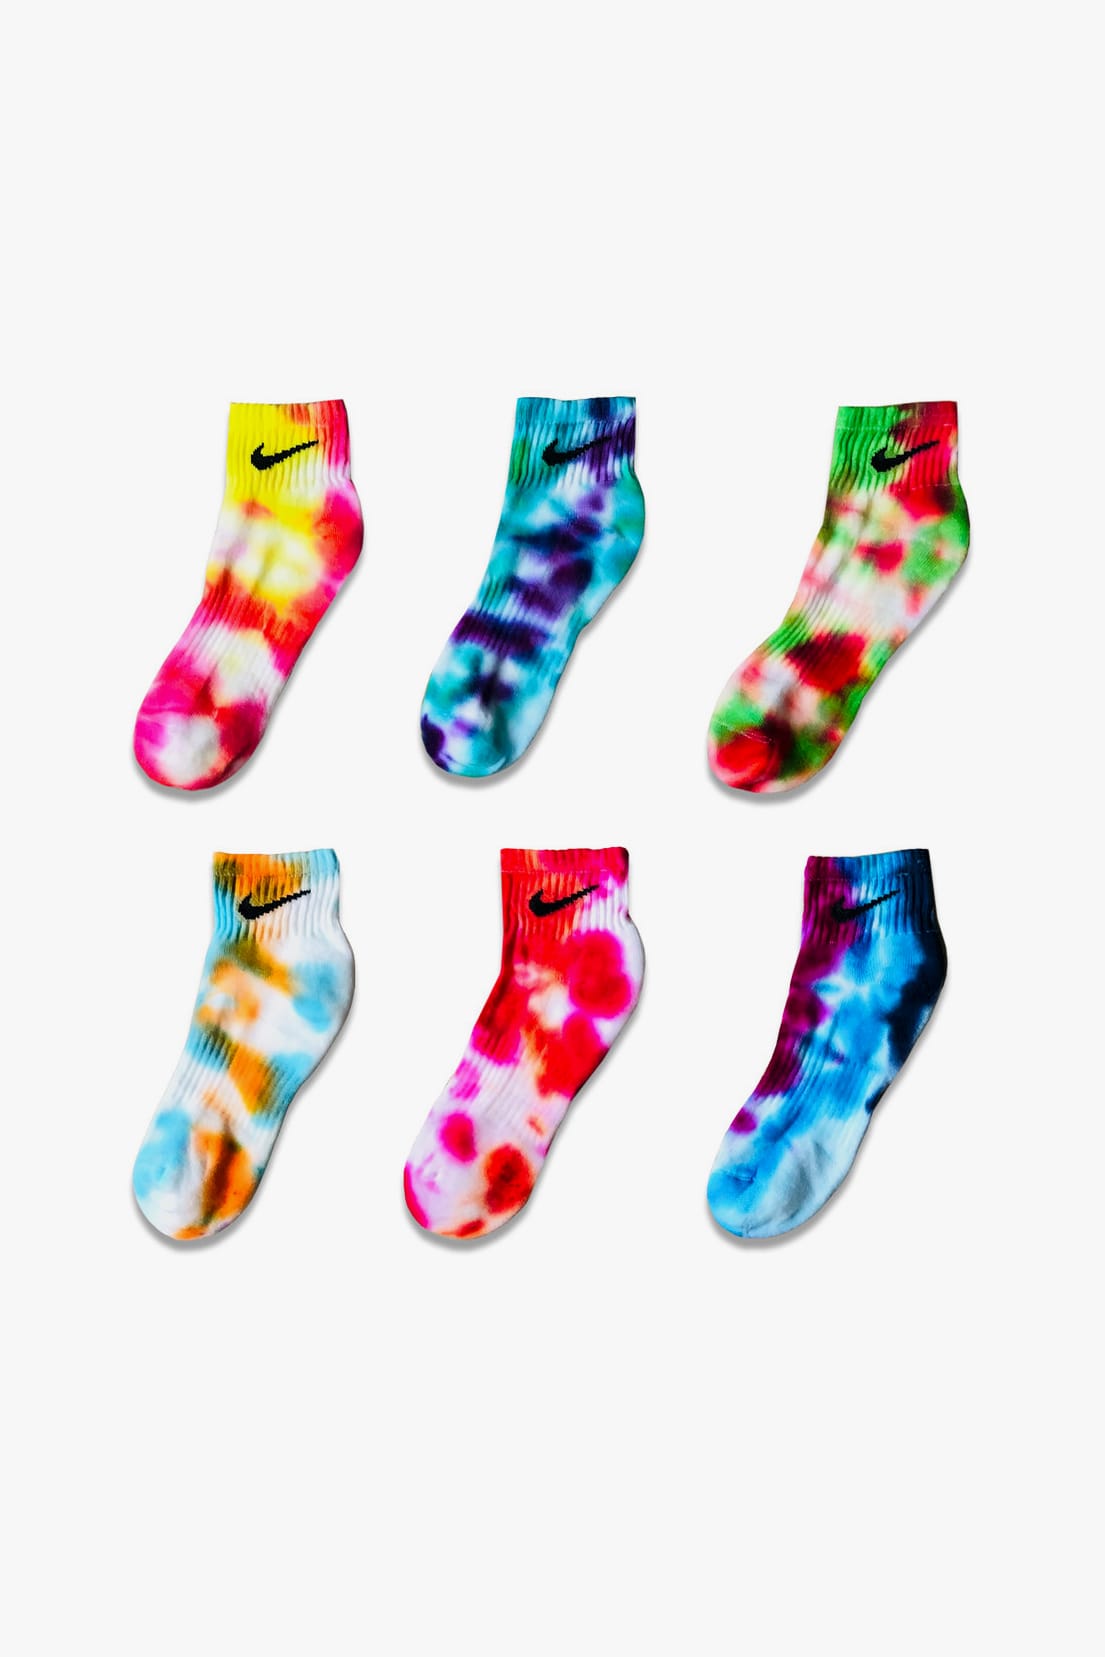 Discount for the set of 3 Unisex tie dye socks Tie dye socks Tie Dye custom crew socks Handmade tie dye socks All colors available